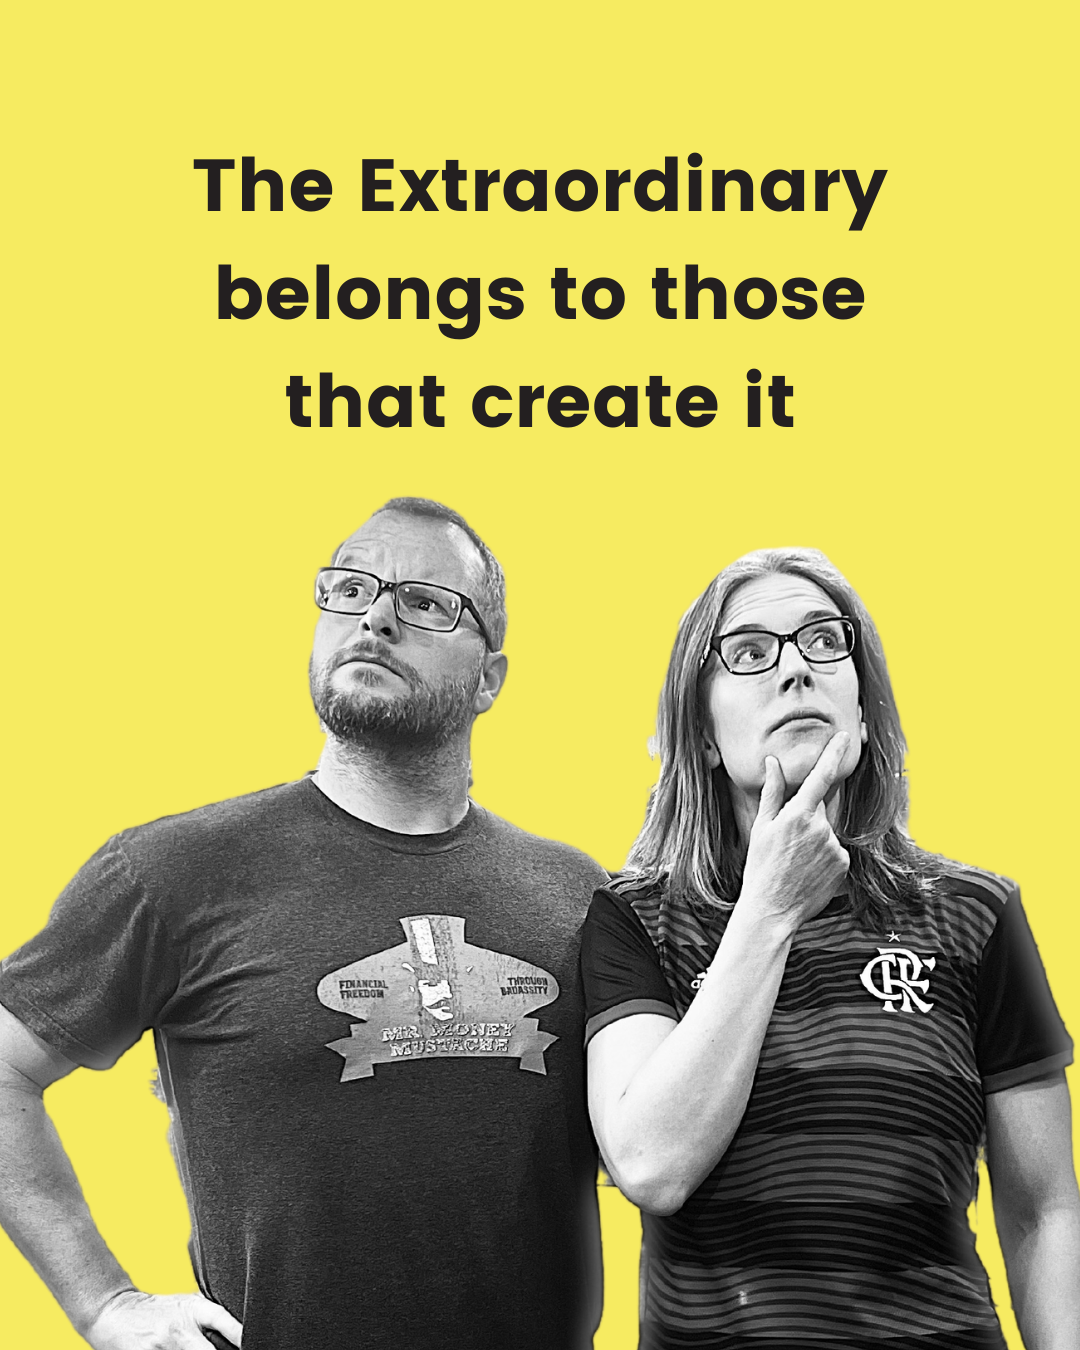 Alan and Katie Donegan: The extraordinary belongs to those that create it